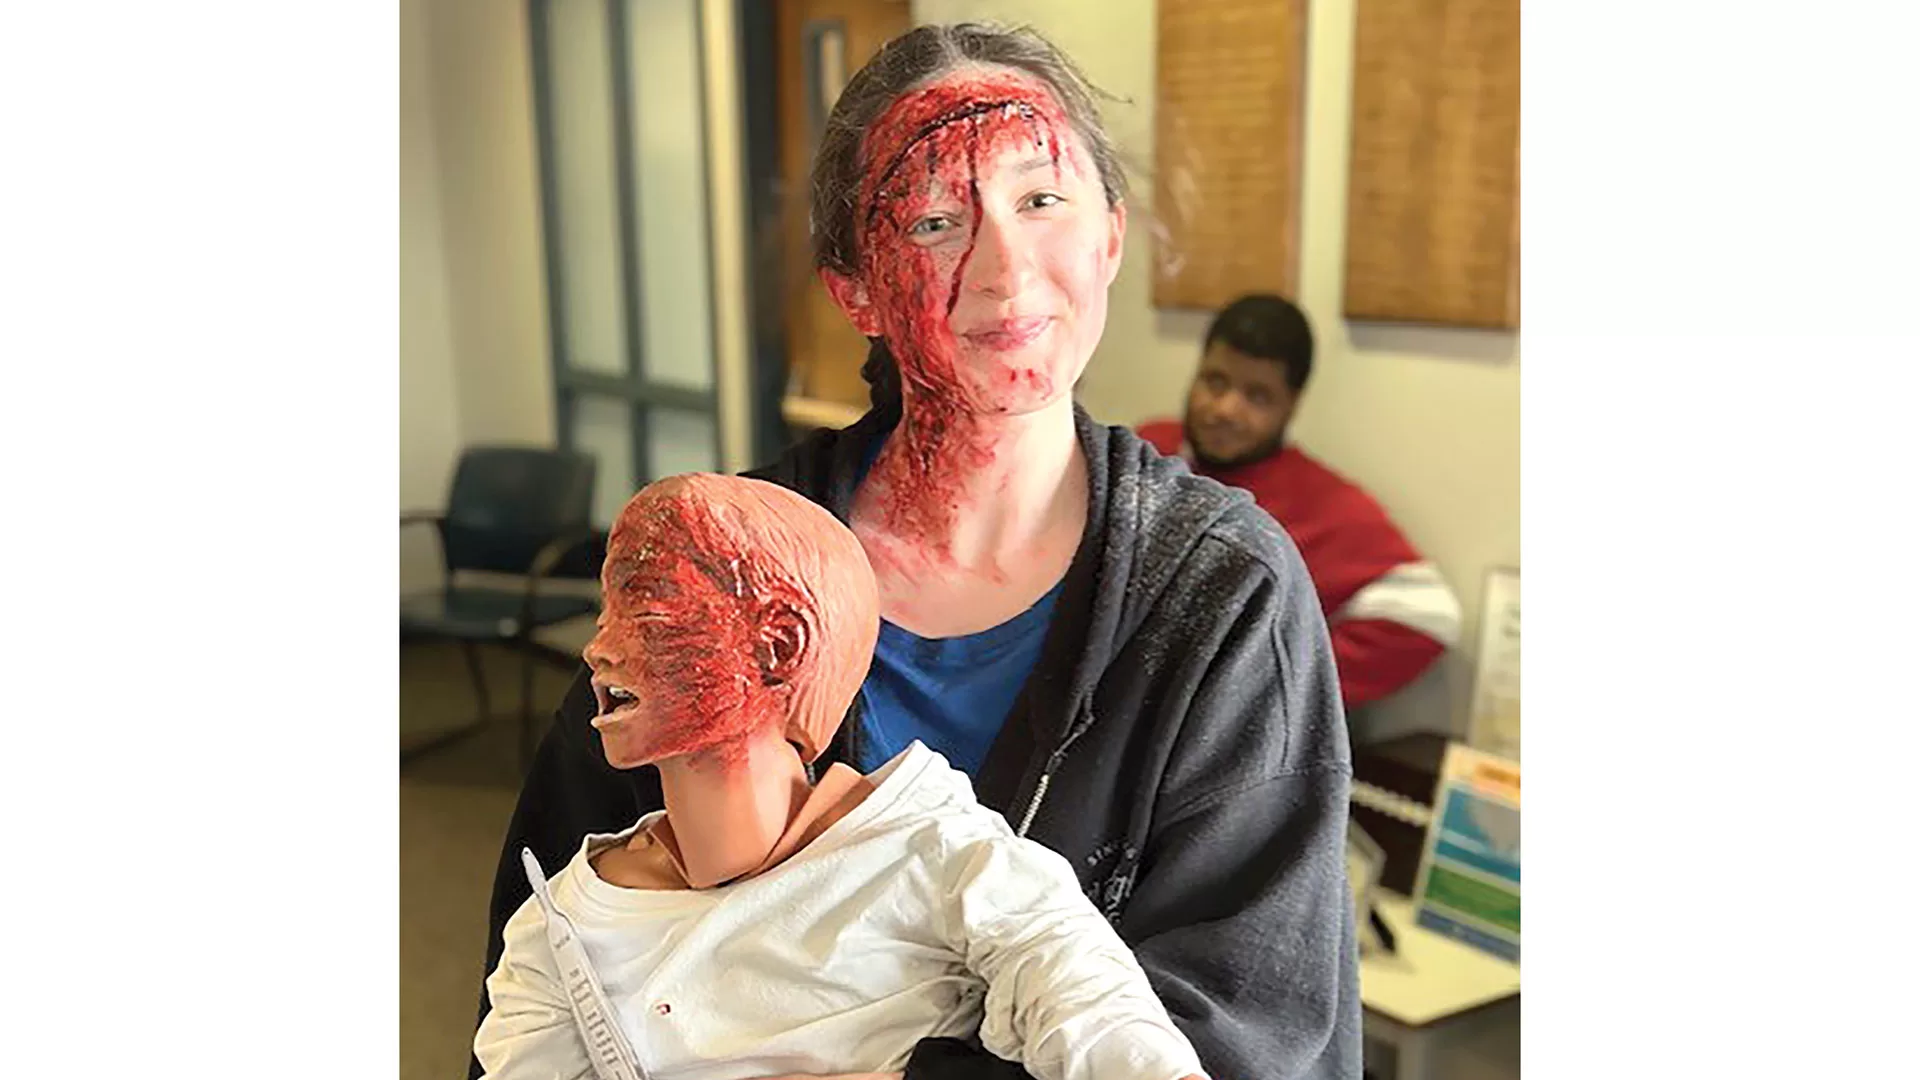 Southwick High School student Abigail Grazia uses her moulage skills on herself and a dummy to add some striking realism.